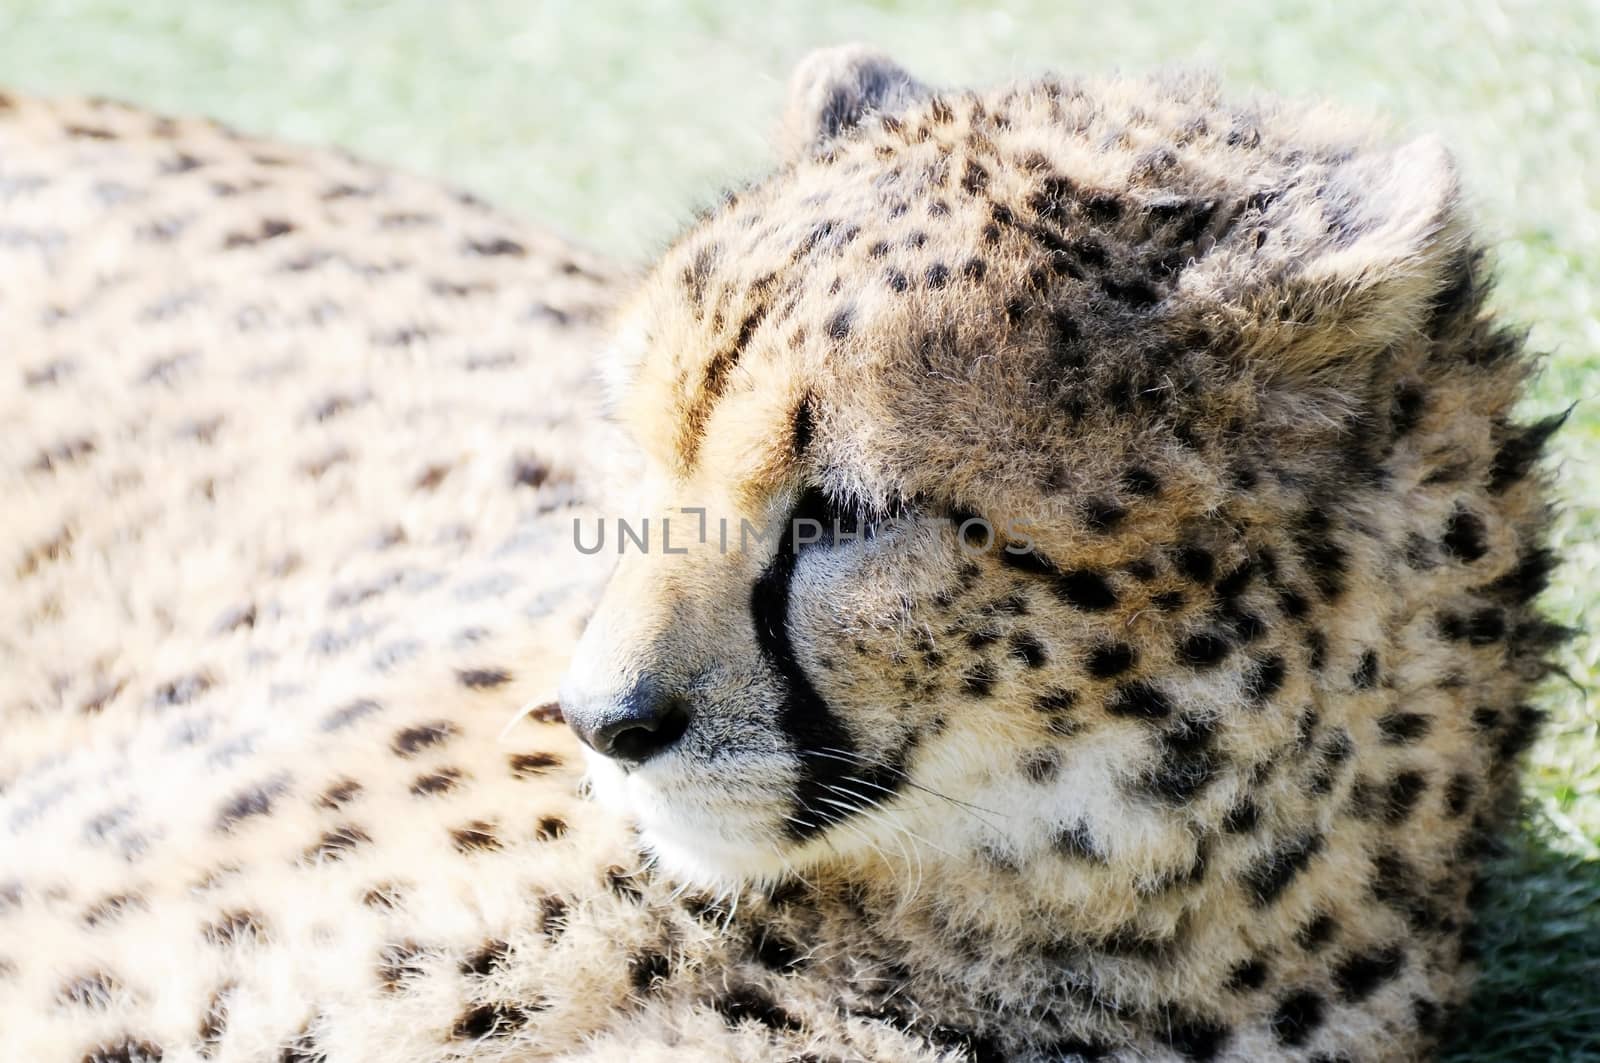 Cheetah in sunshine by kmwphotography